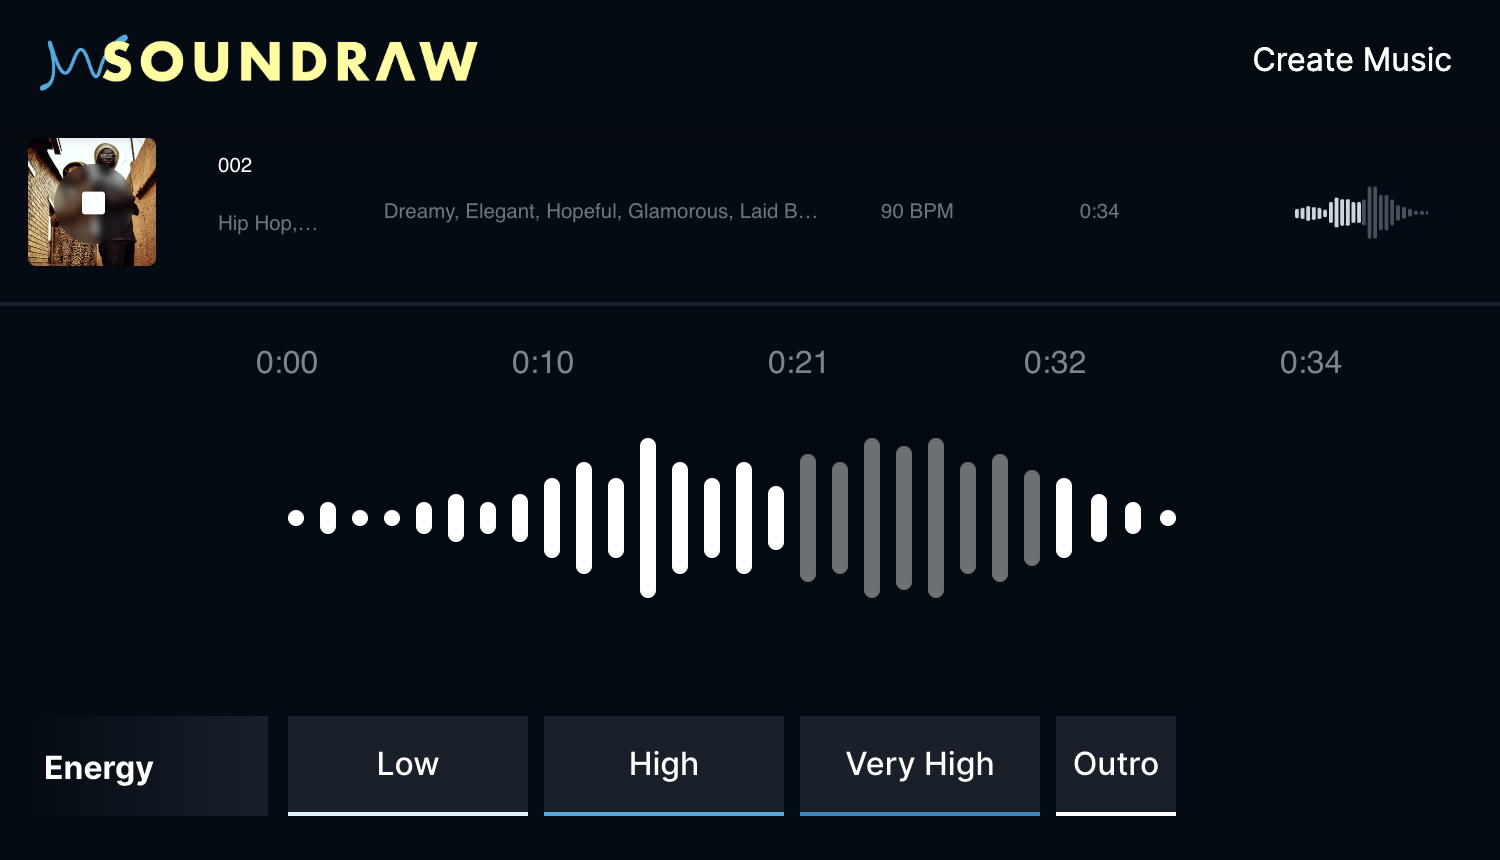 Interface of Soundraw